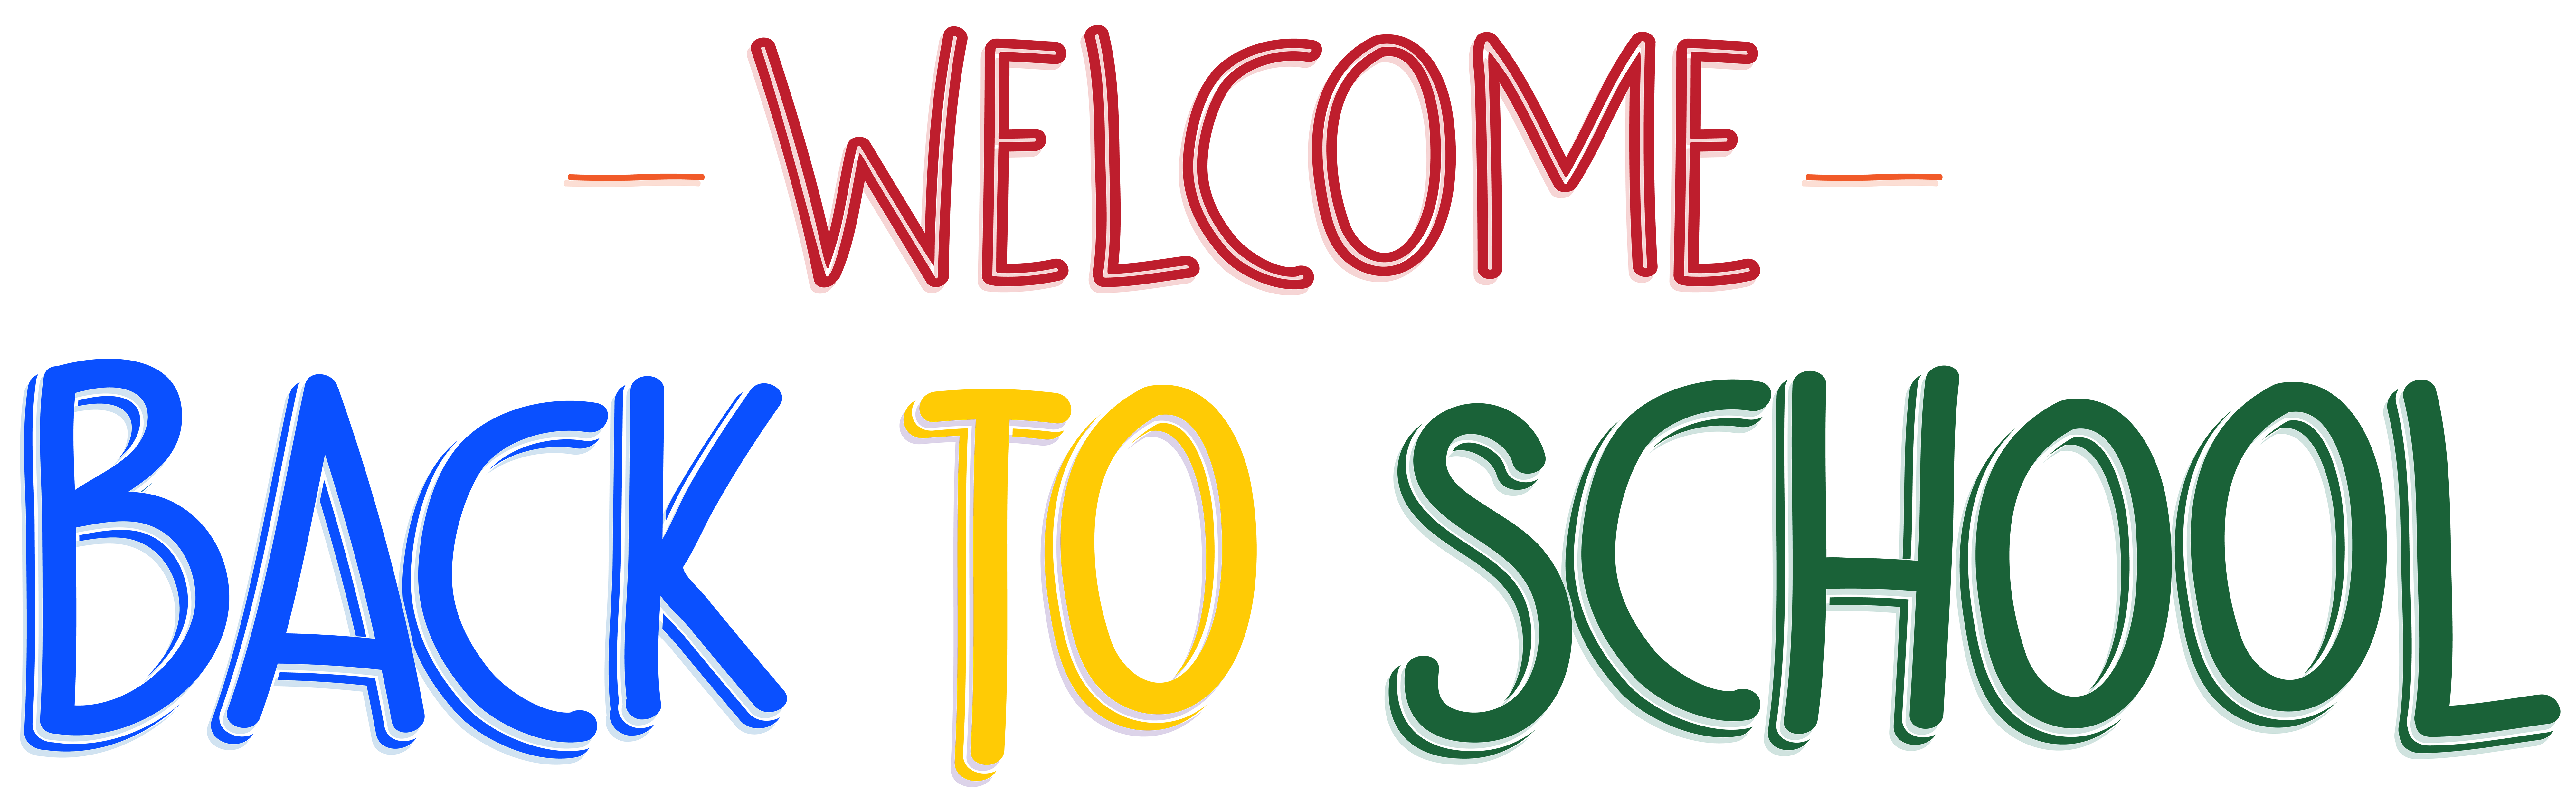 Curriculum clipart junior high.  collection of welcome